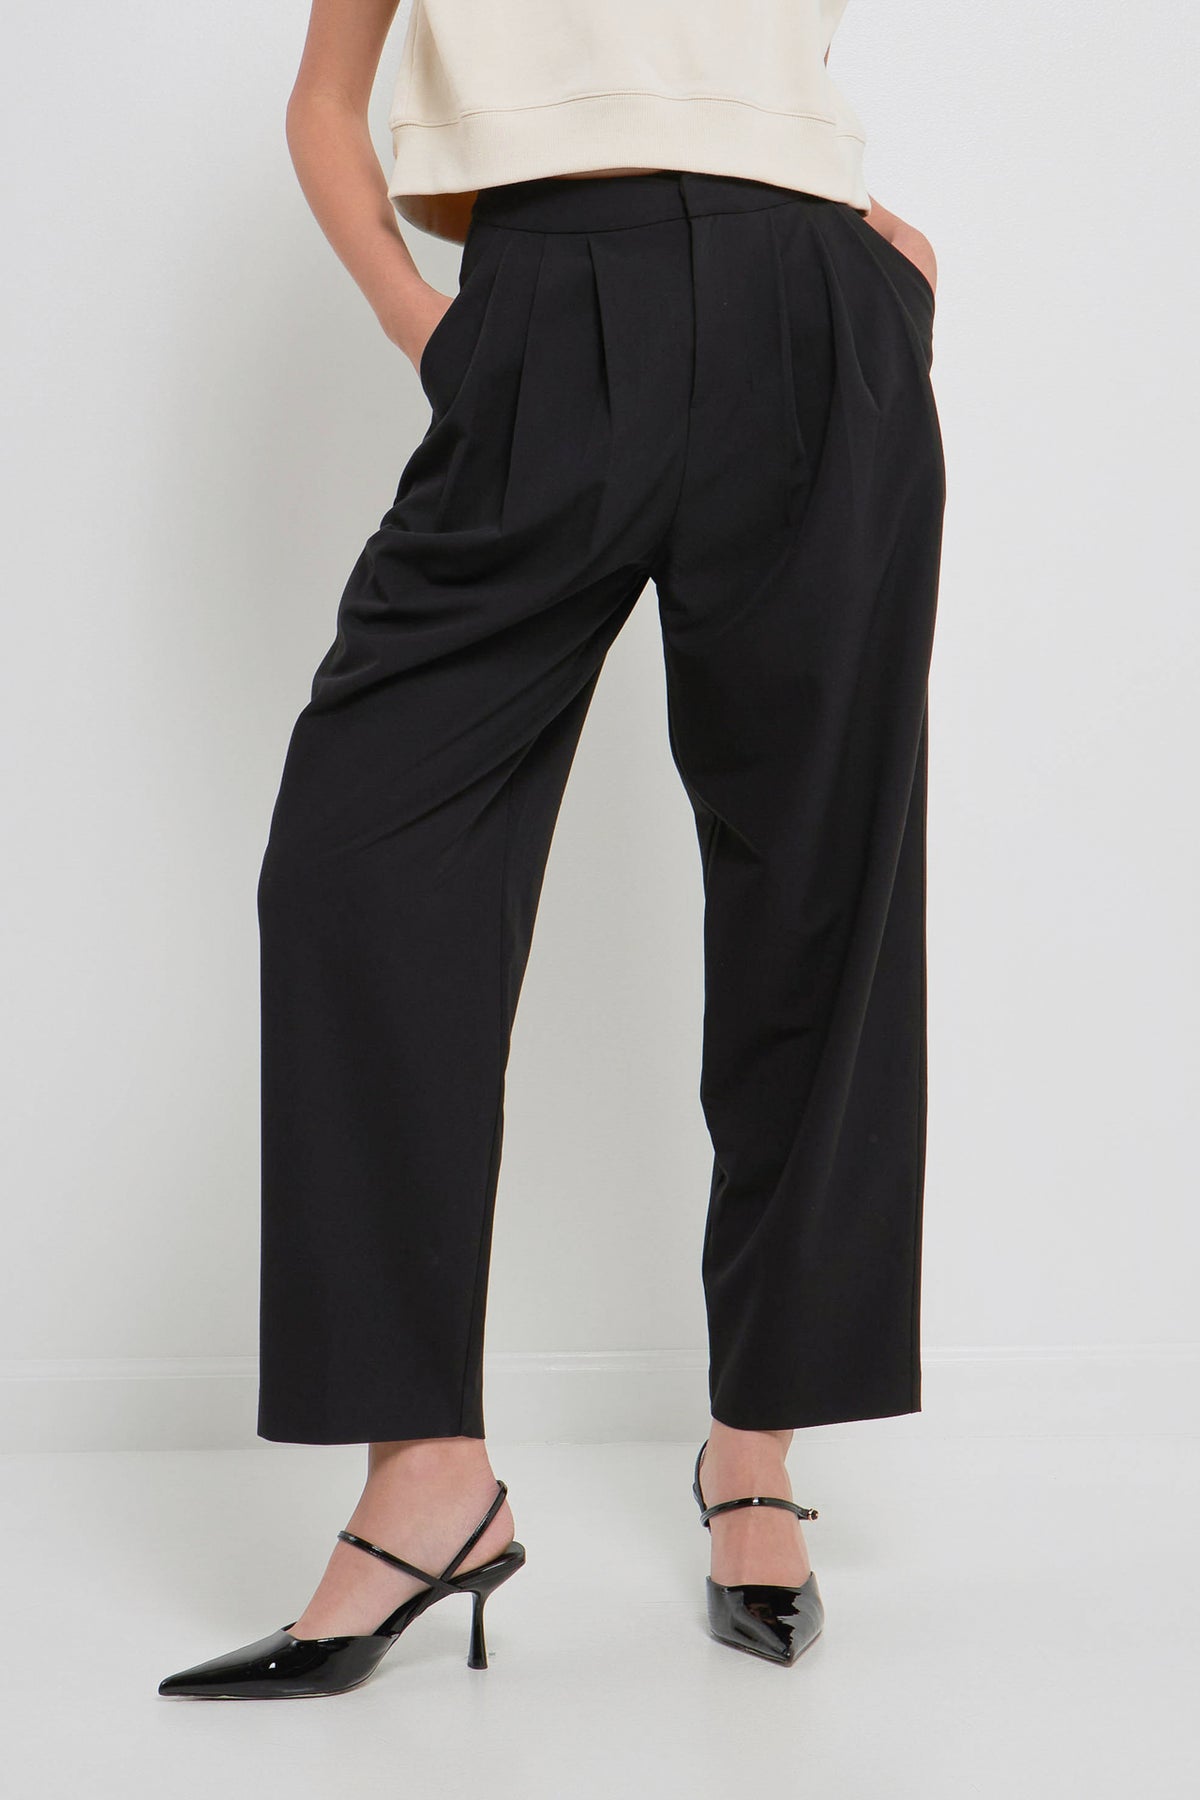 GREY LAB - High Waist Balloon Trousers - PANTS available at Objectrare